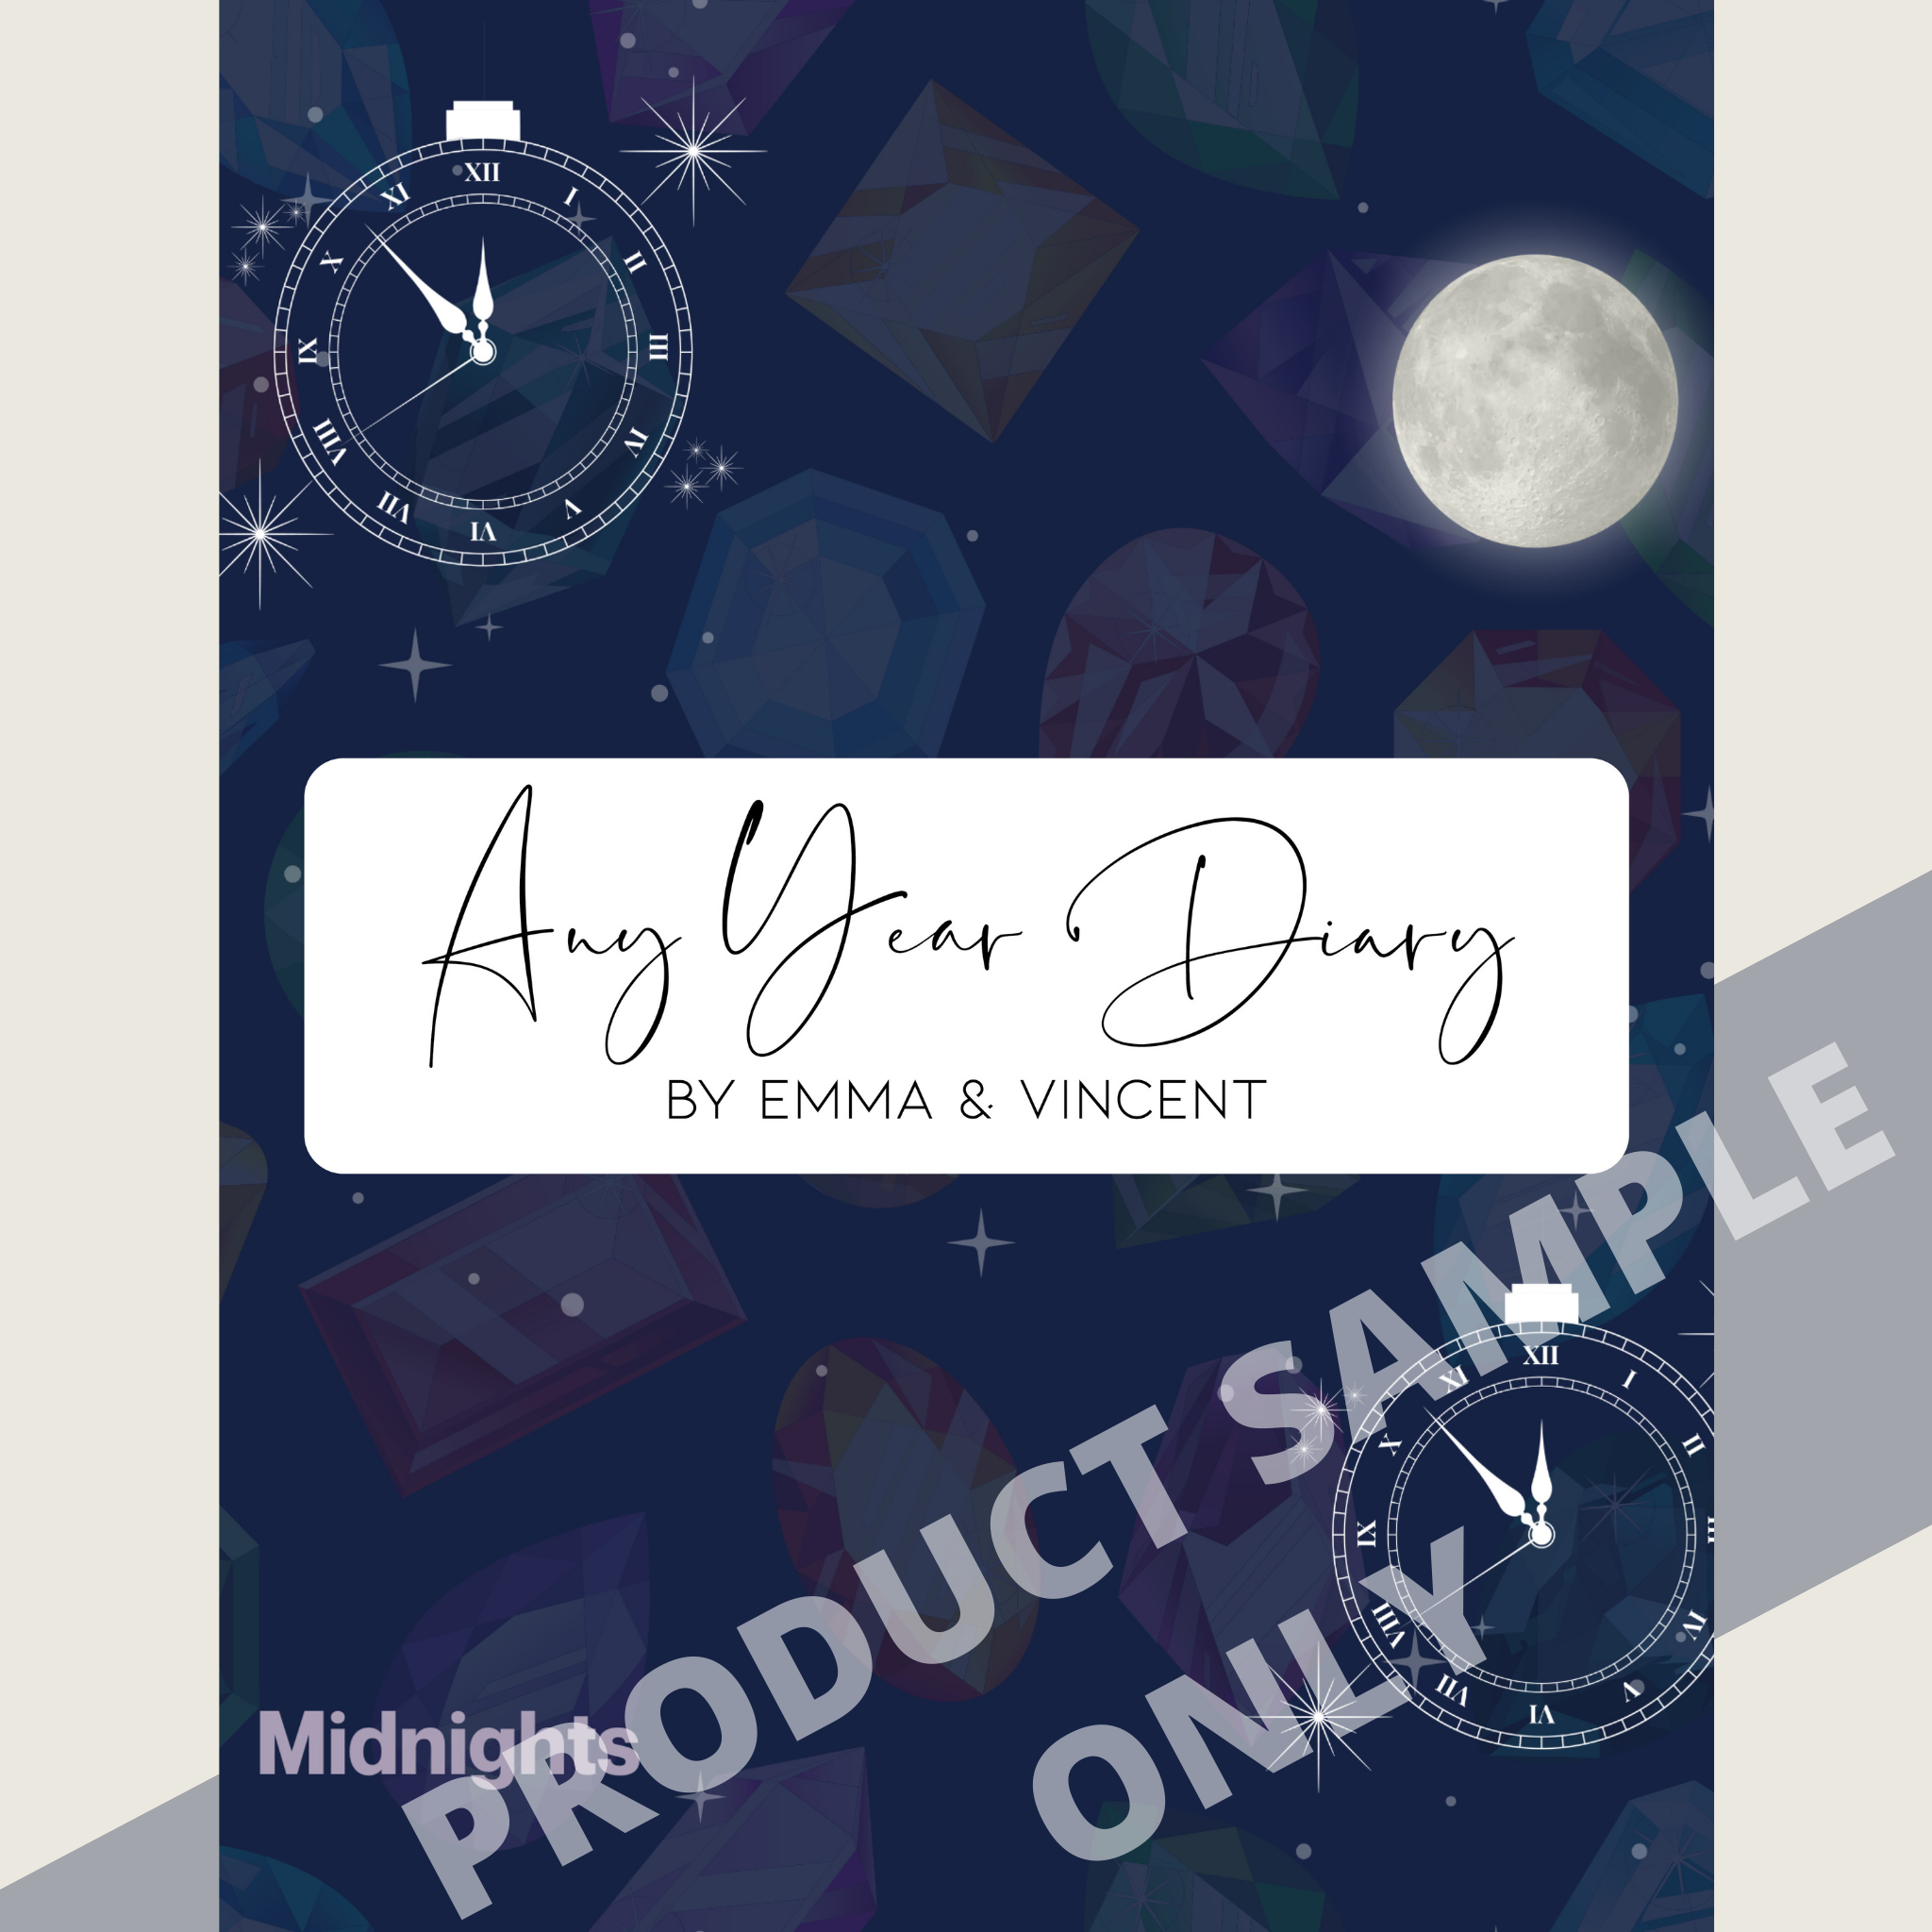 DIGITAL ANY YEAR DIARY (Midnights Print - The Eras Tour)